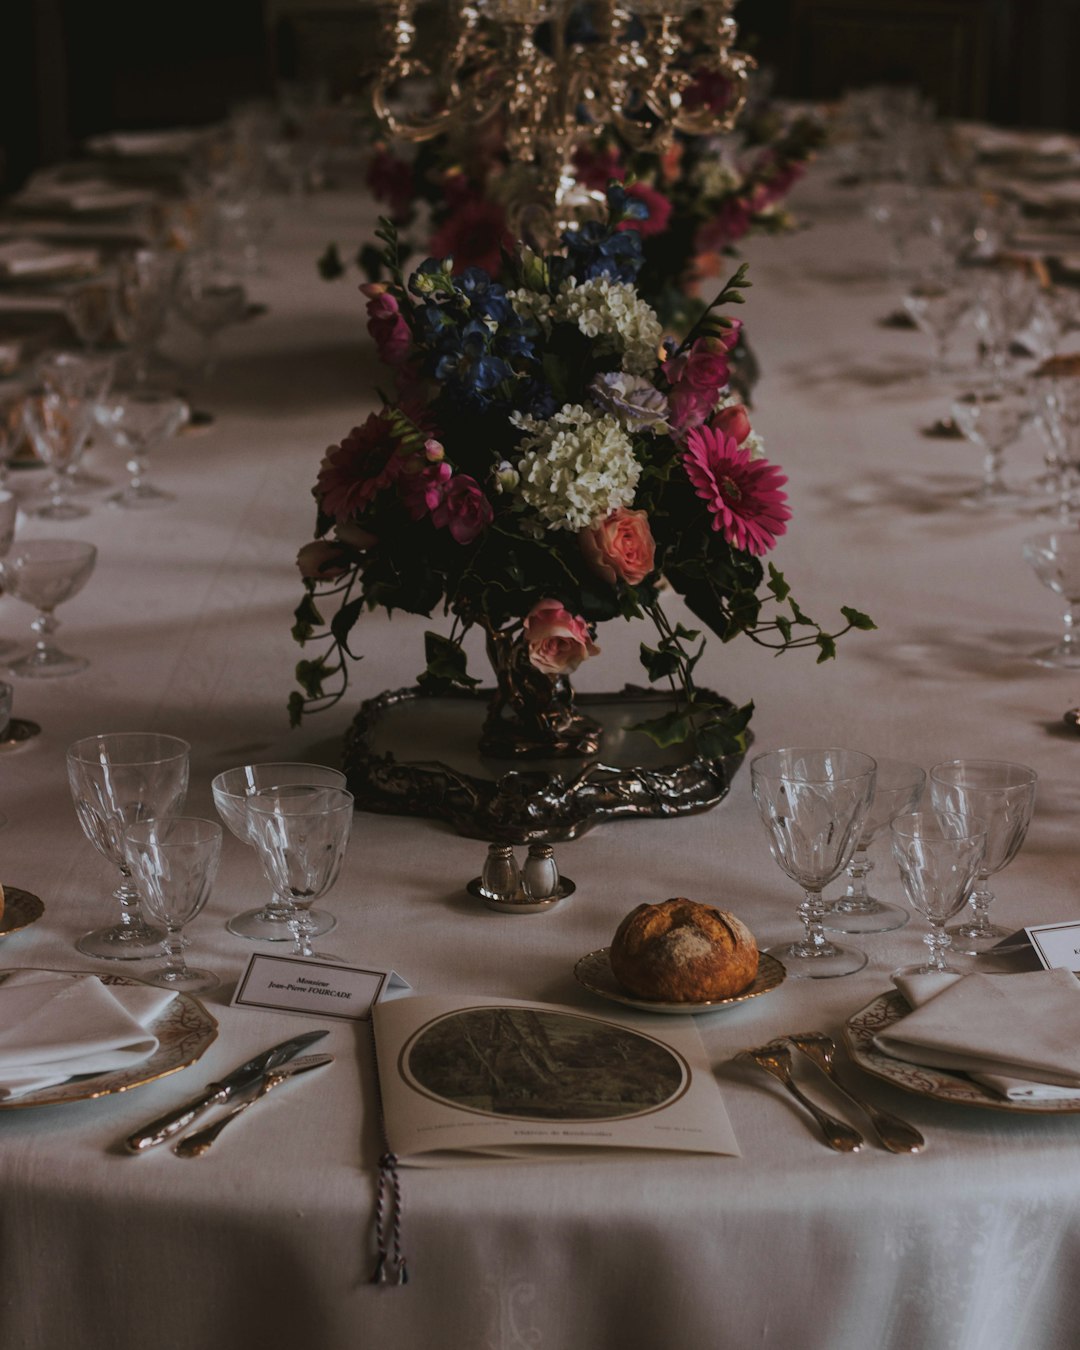 wine glasses on table with flower arrangement